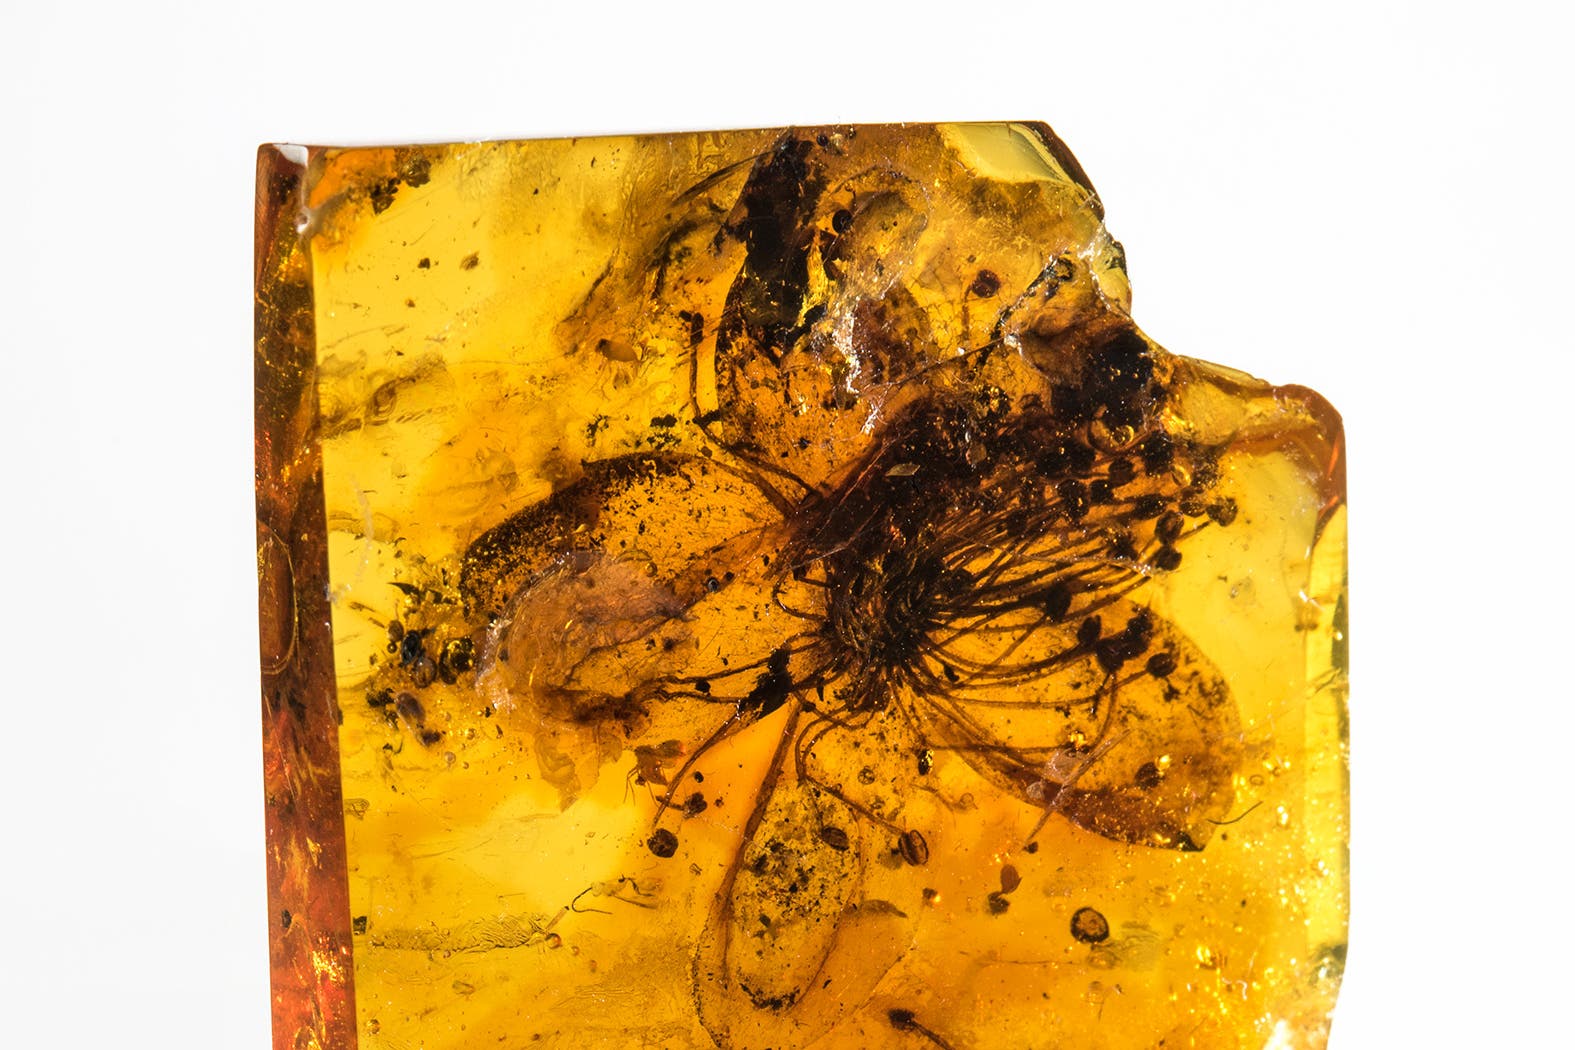 See the Largest Known Flower Preserved in Amber, Smart News